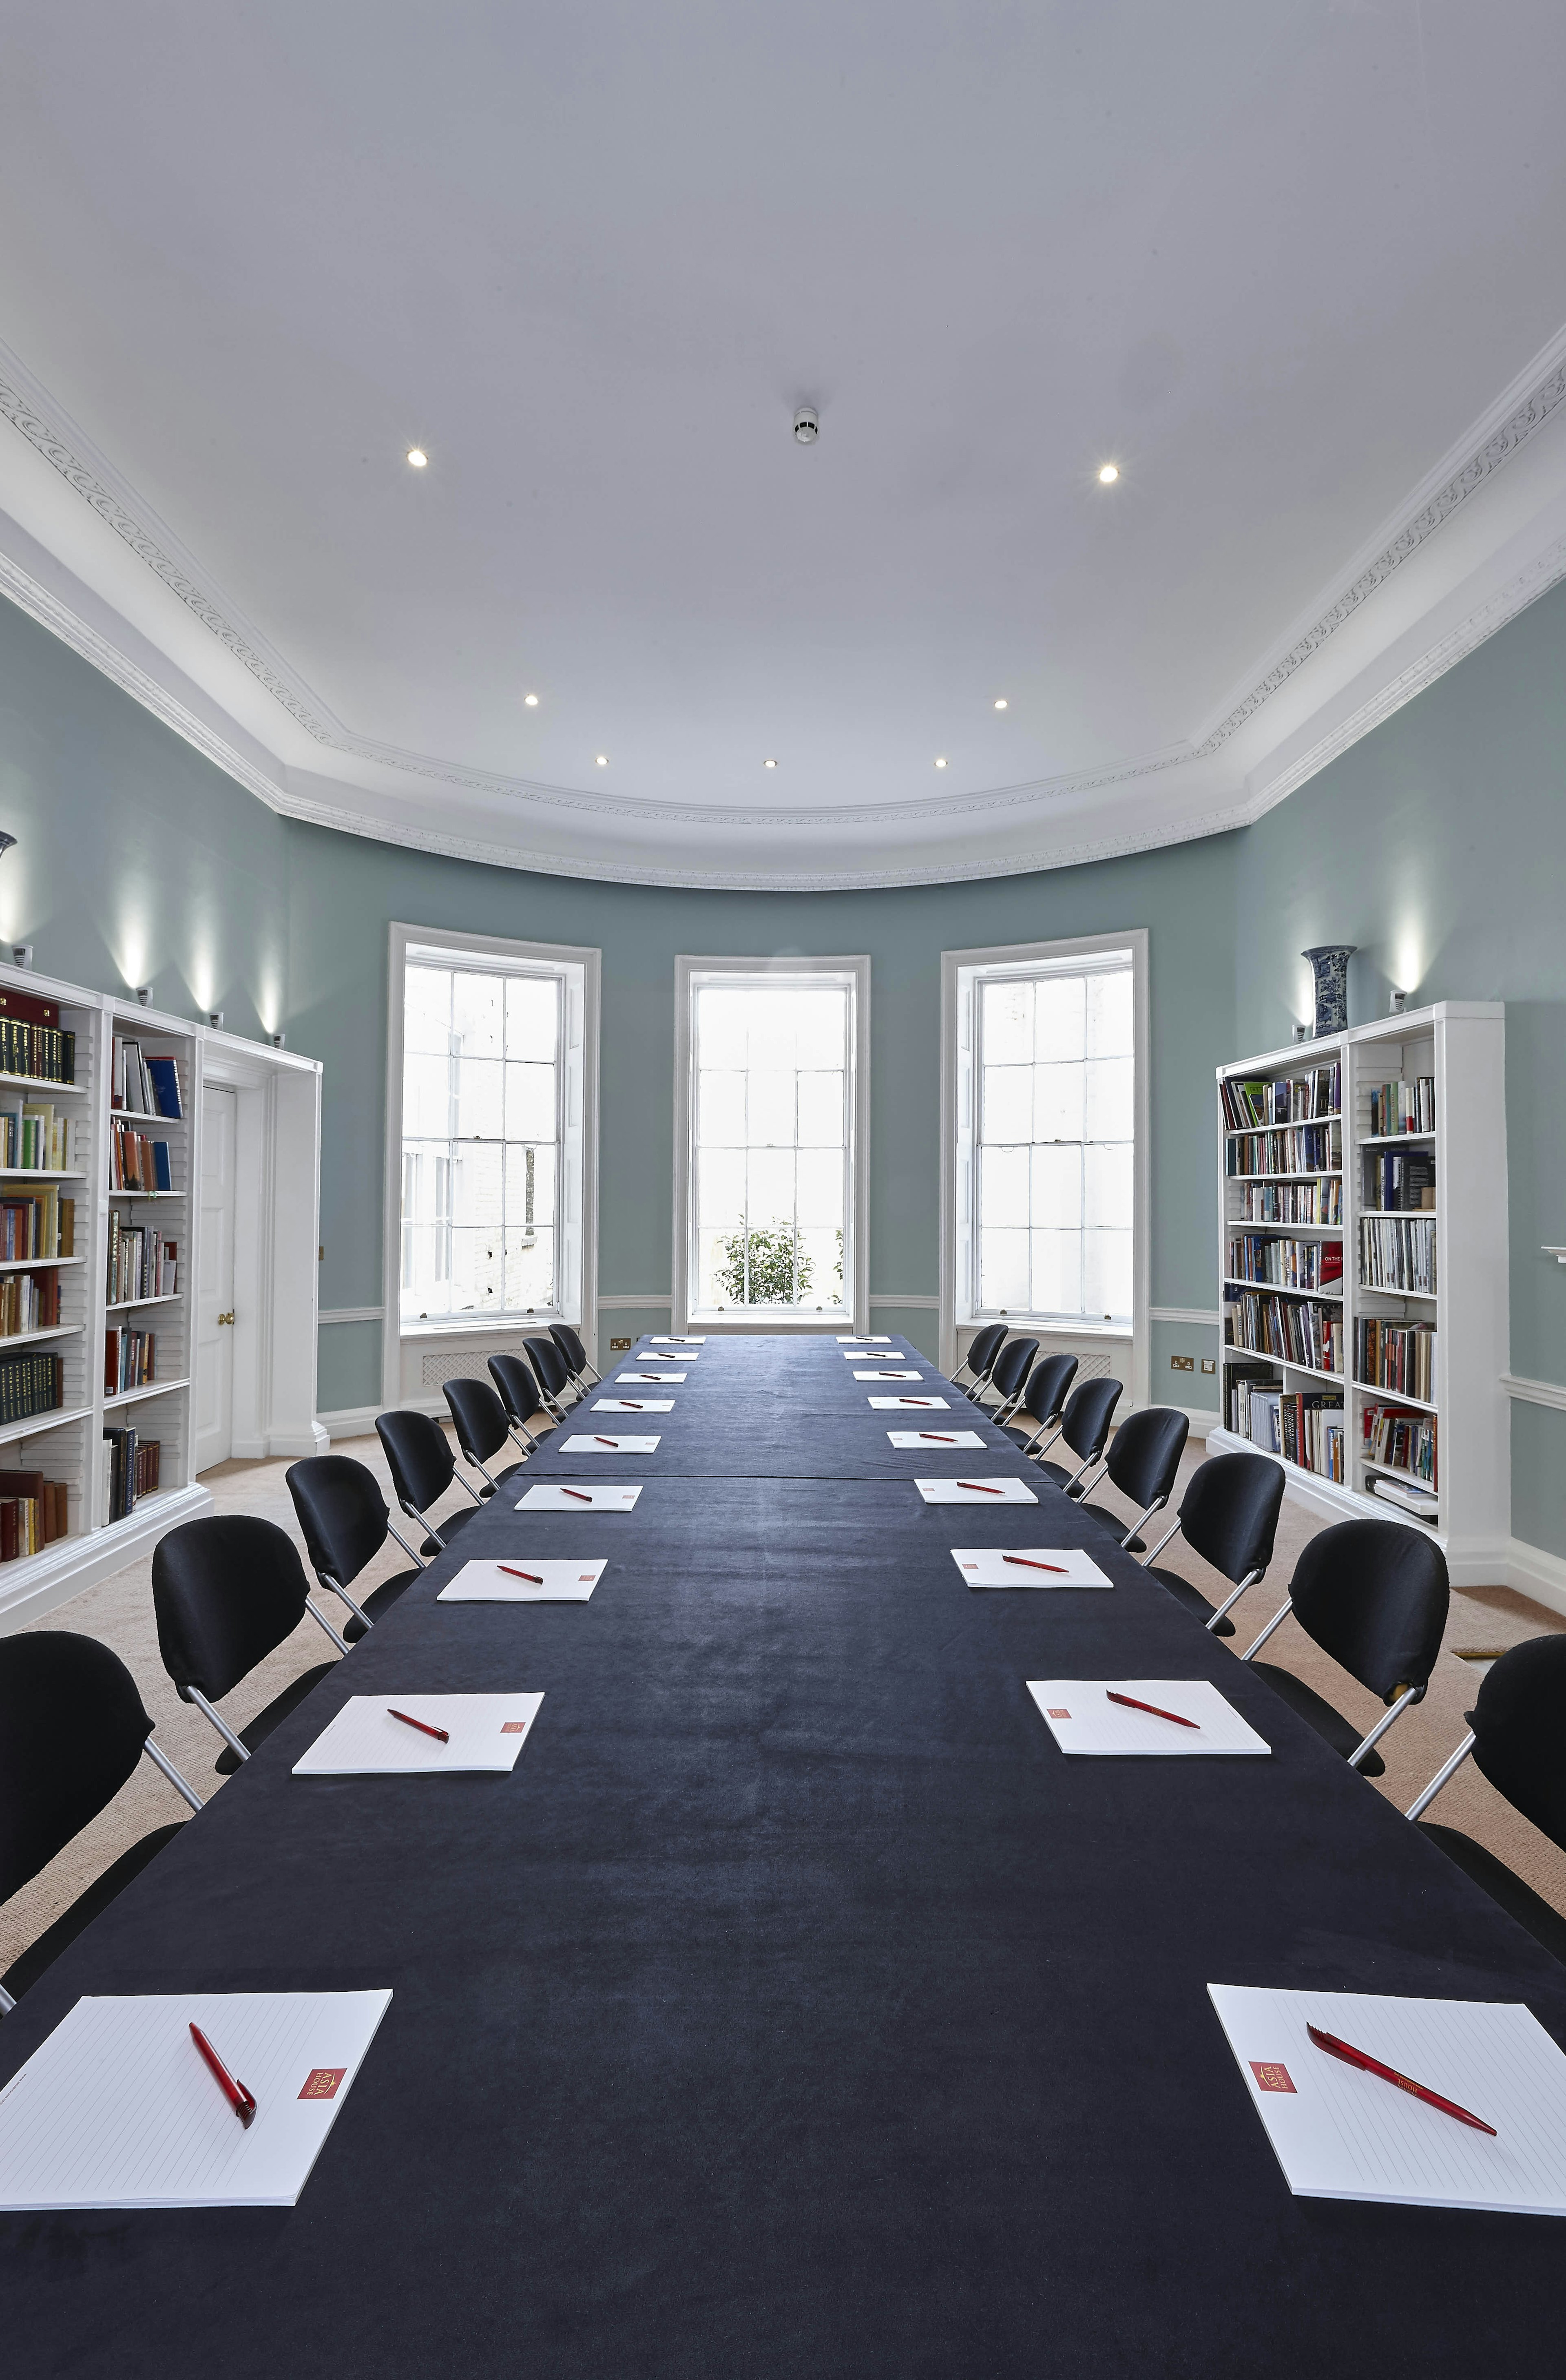 Trending Meeting Rooms - Asia House - Business in Library - Banner